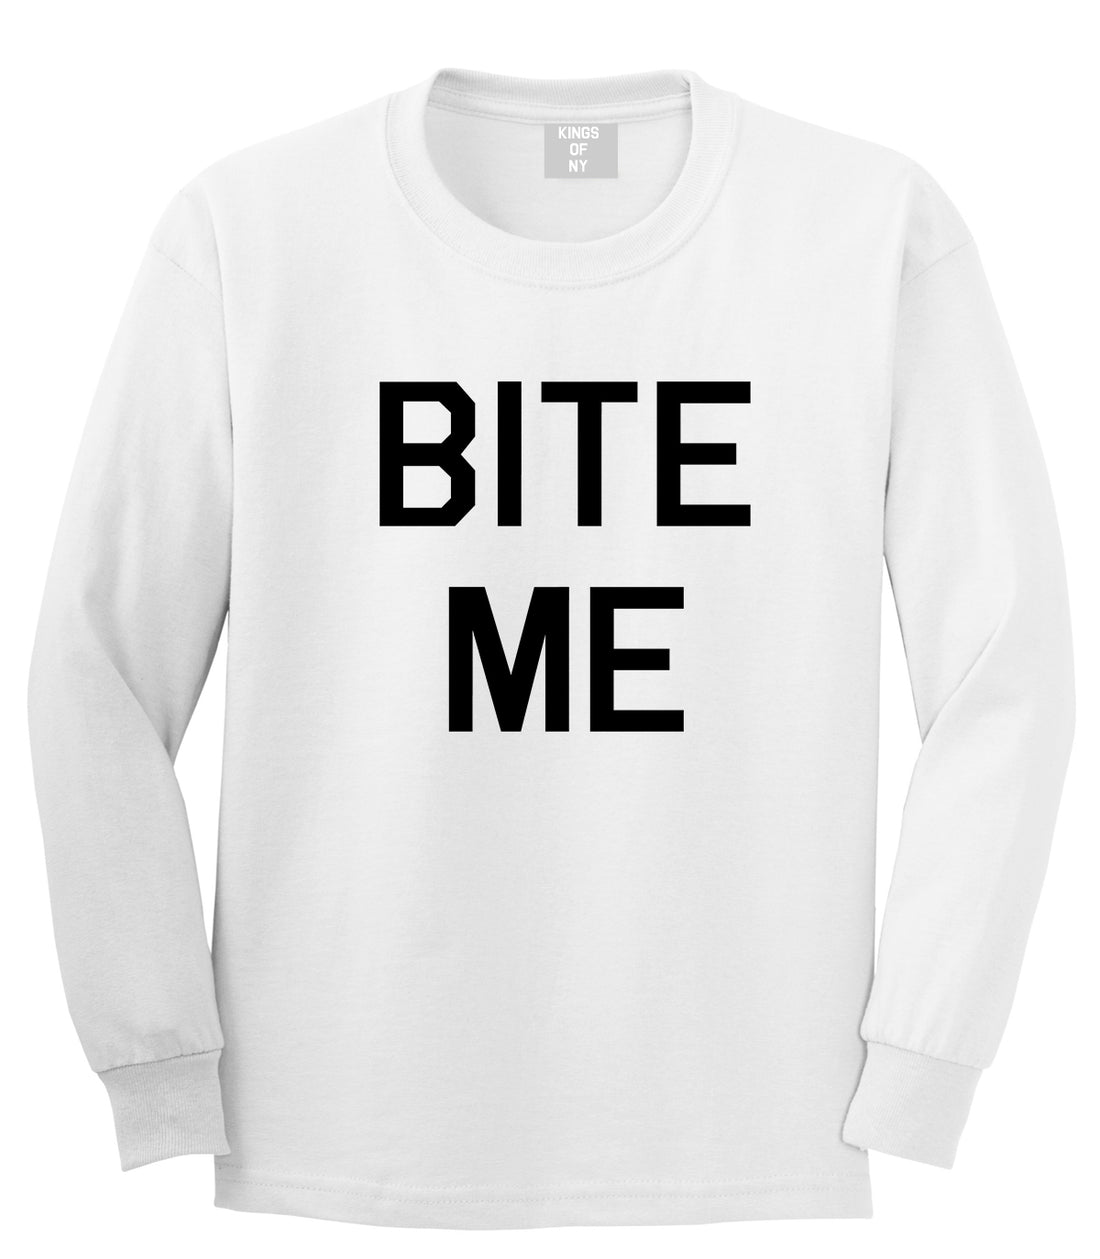 Bite Me White Long Sleeve T-Shirt by Kings Of NY